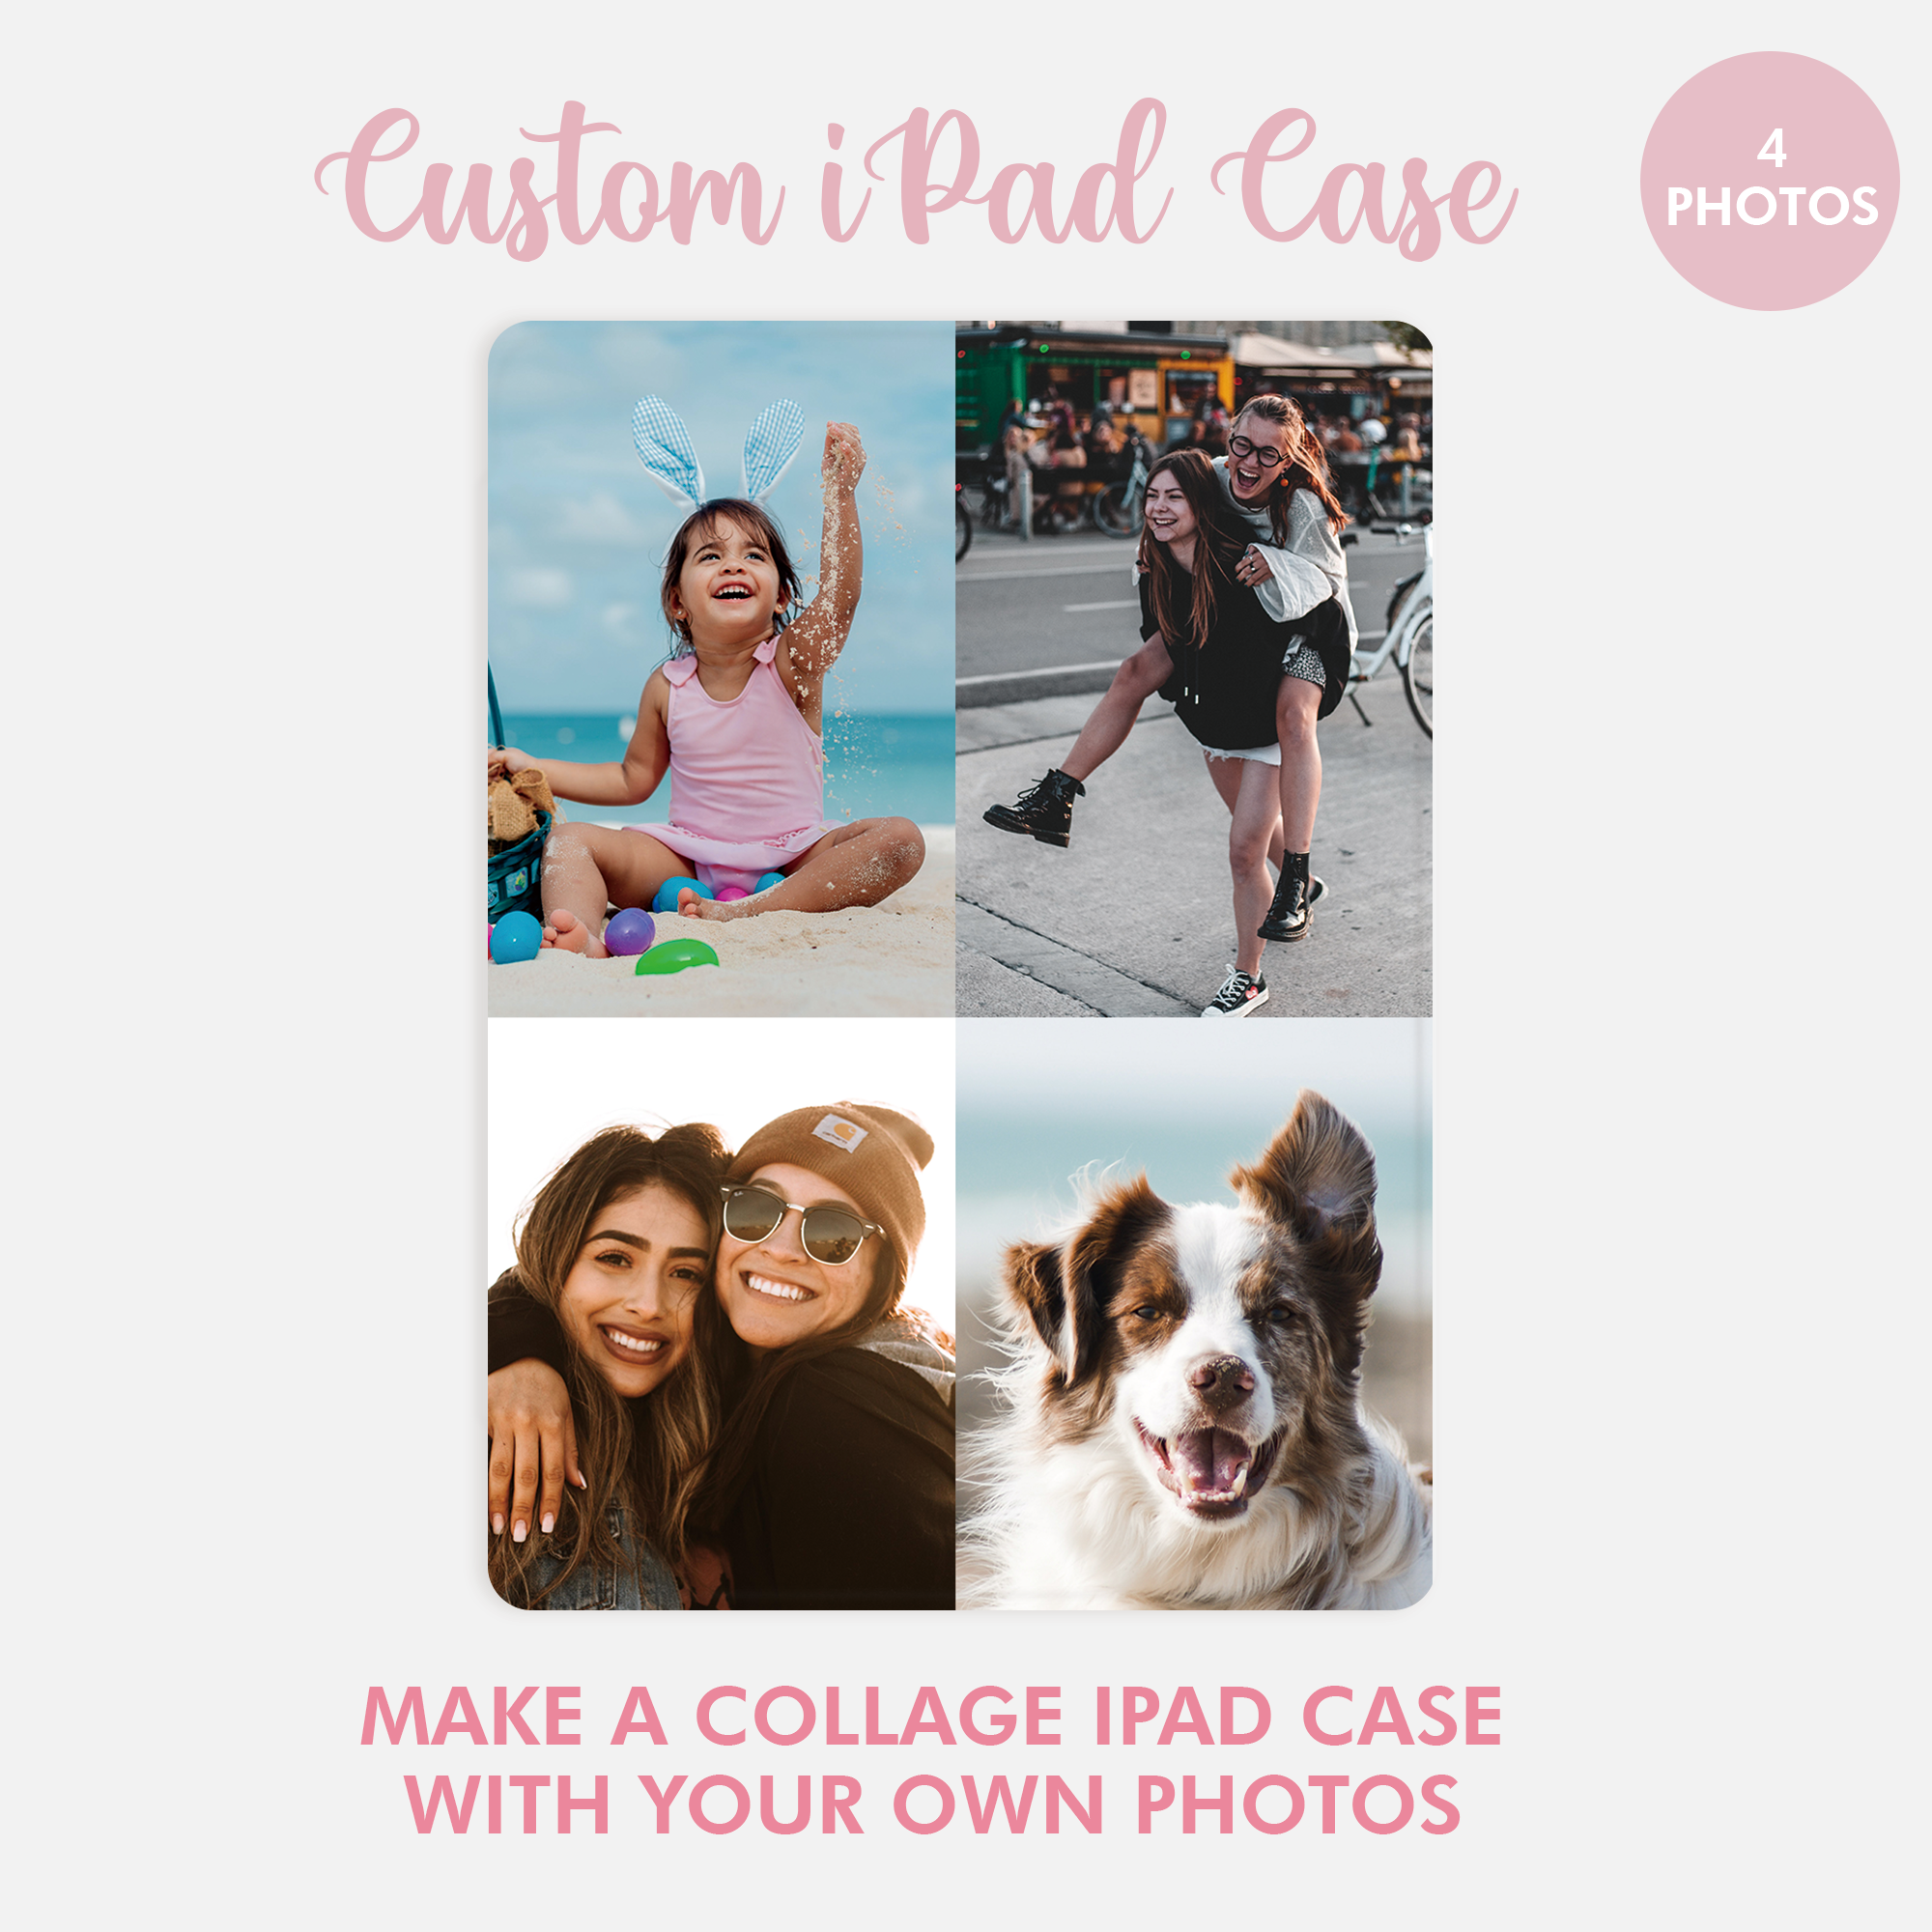 Make Your Own iPad Case with Four Photos - Personalized Gift, Custom Photos iPad Case